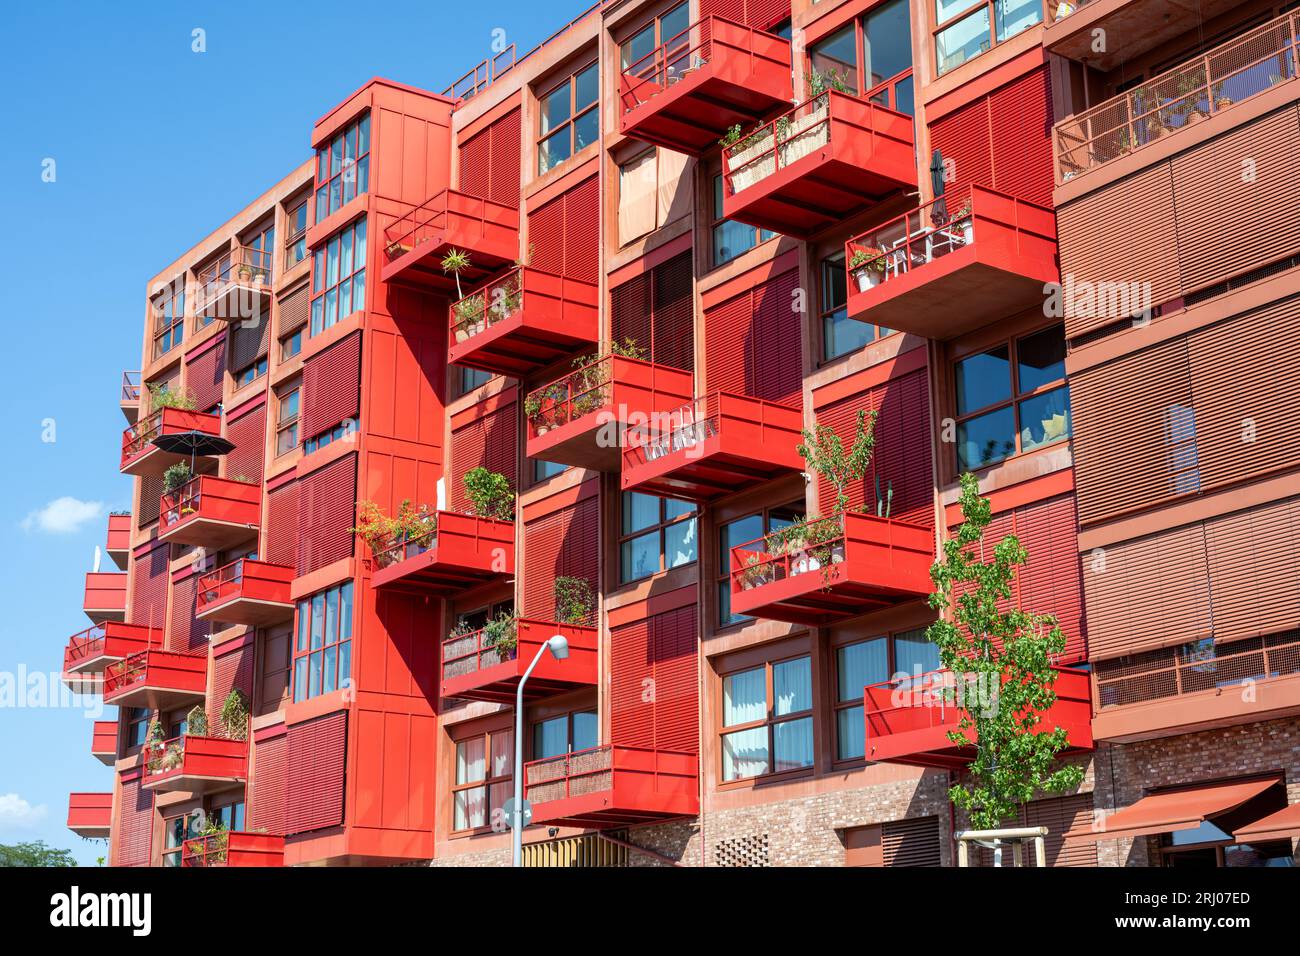 Red apartment building with balconies seen in Berlin, Germany Stock Photo